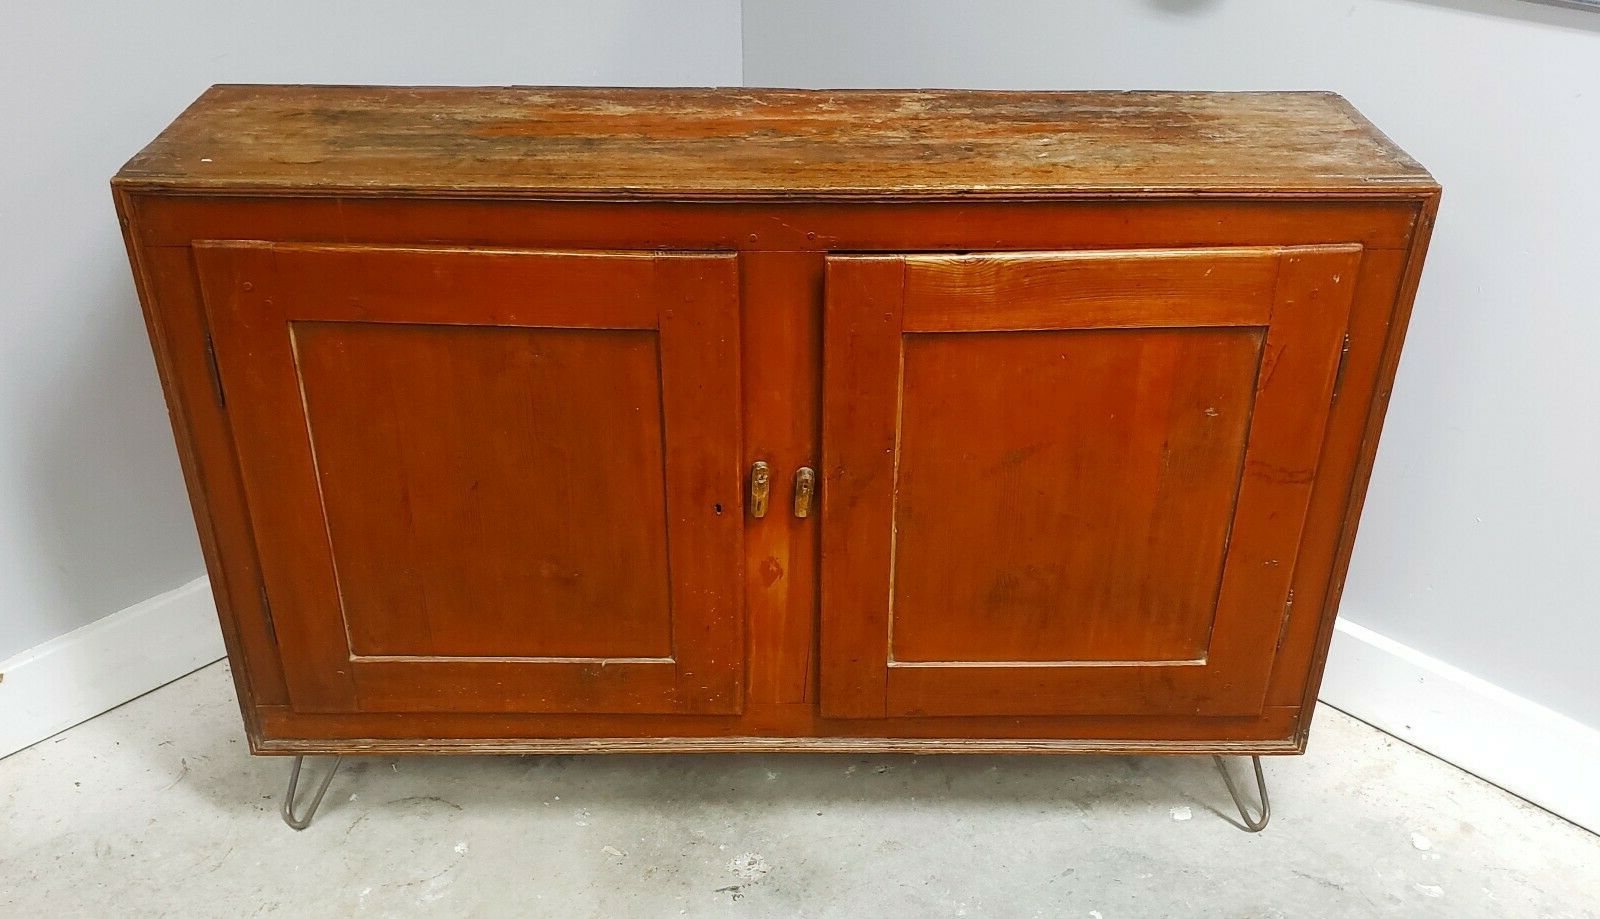 Antique 18th Century Commode Sideboard Credenza Rustic Cabinet Pertaining To Most Up To Date Lowrey Credenzas (View 16 of 20)